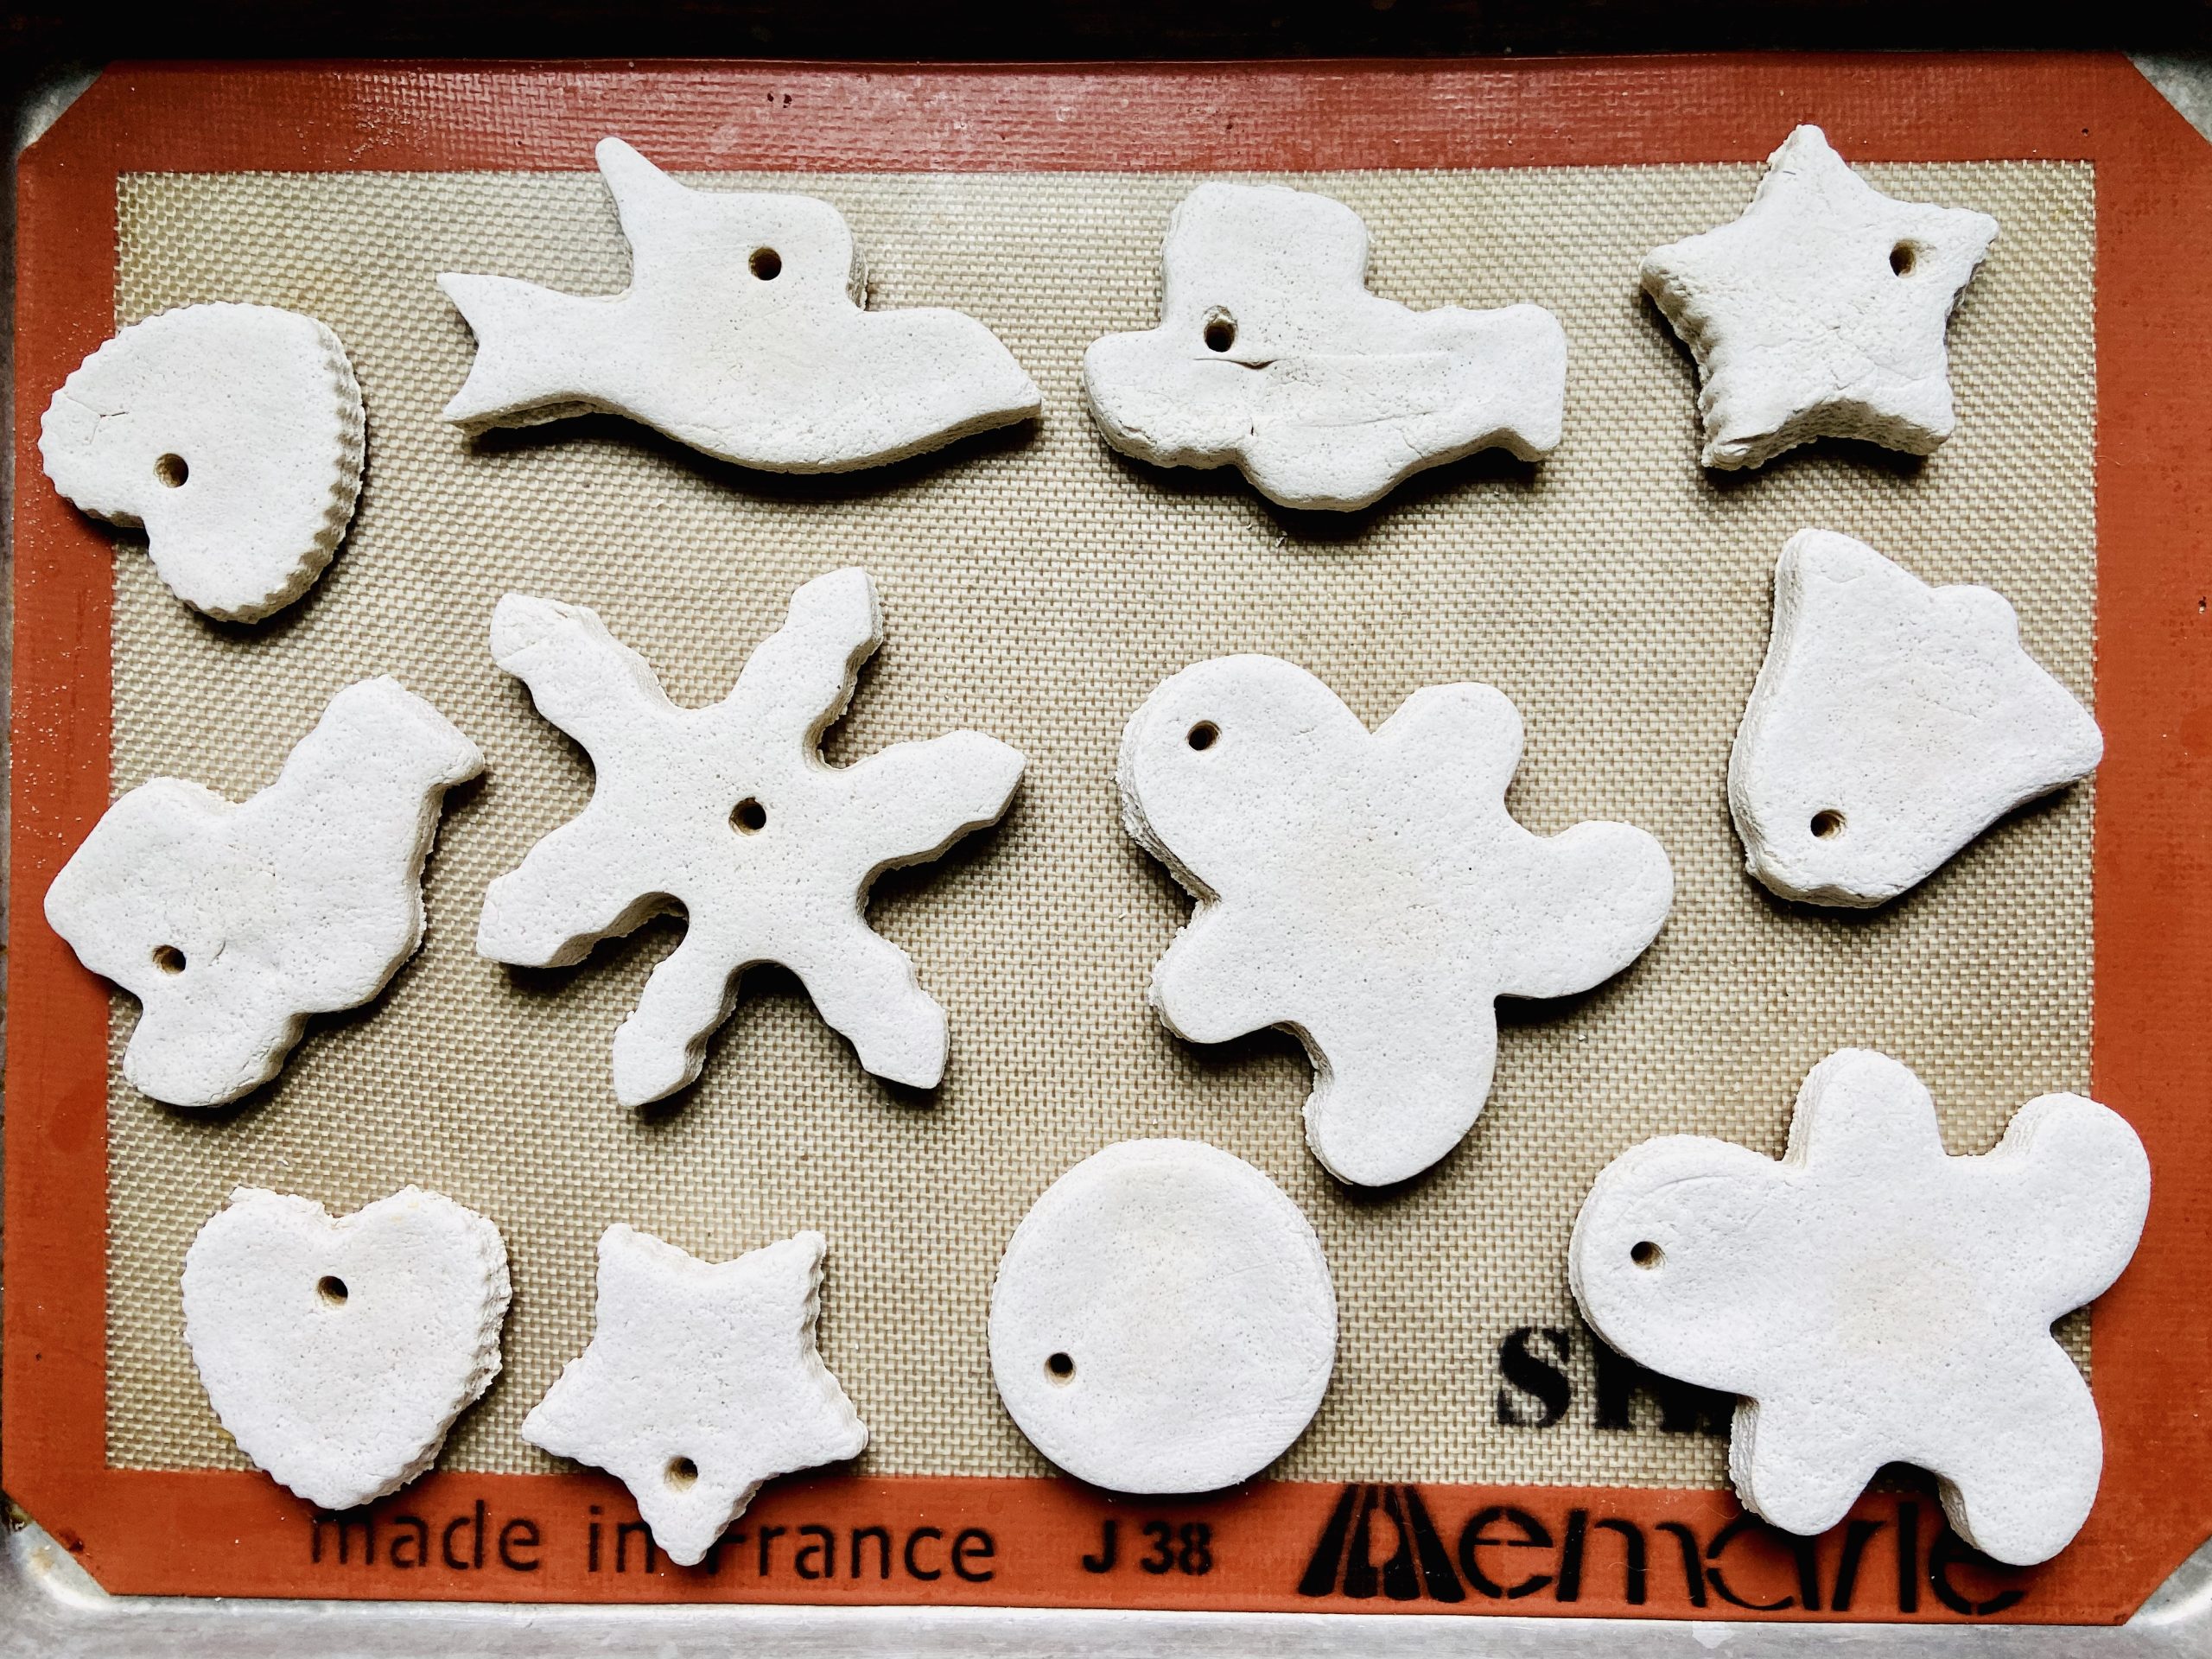 2-Ingredient White Clay Dough Ornaments - Happy Hooligans